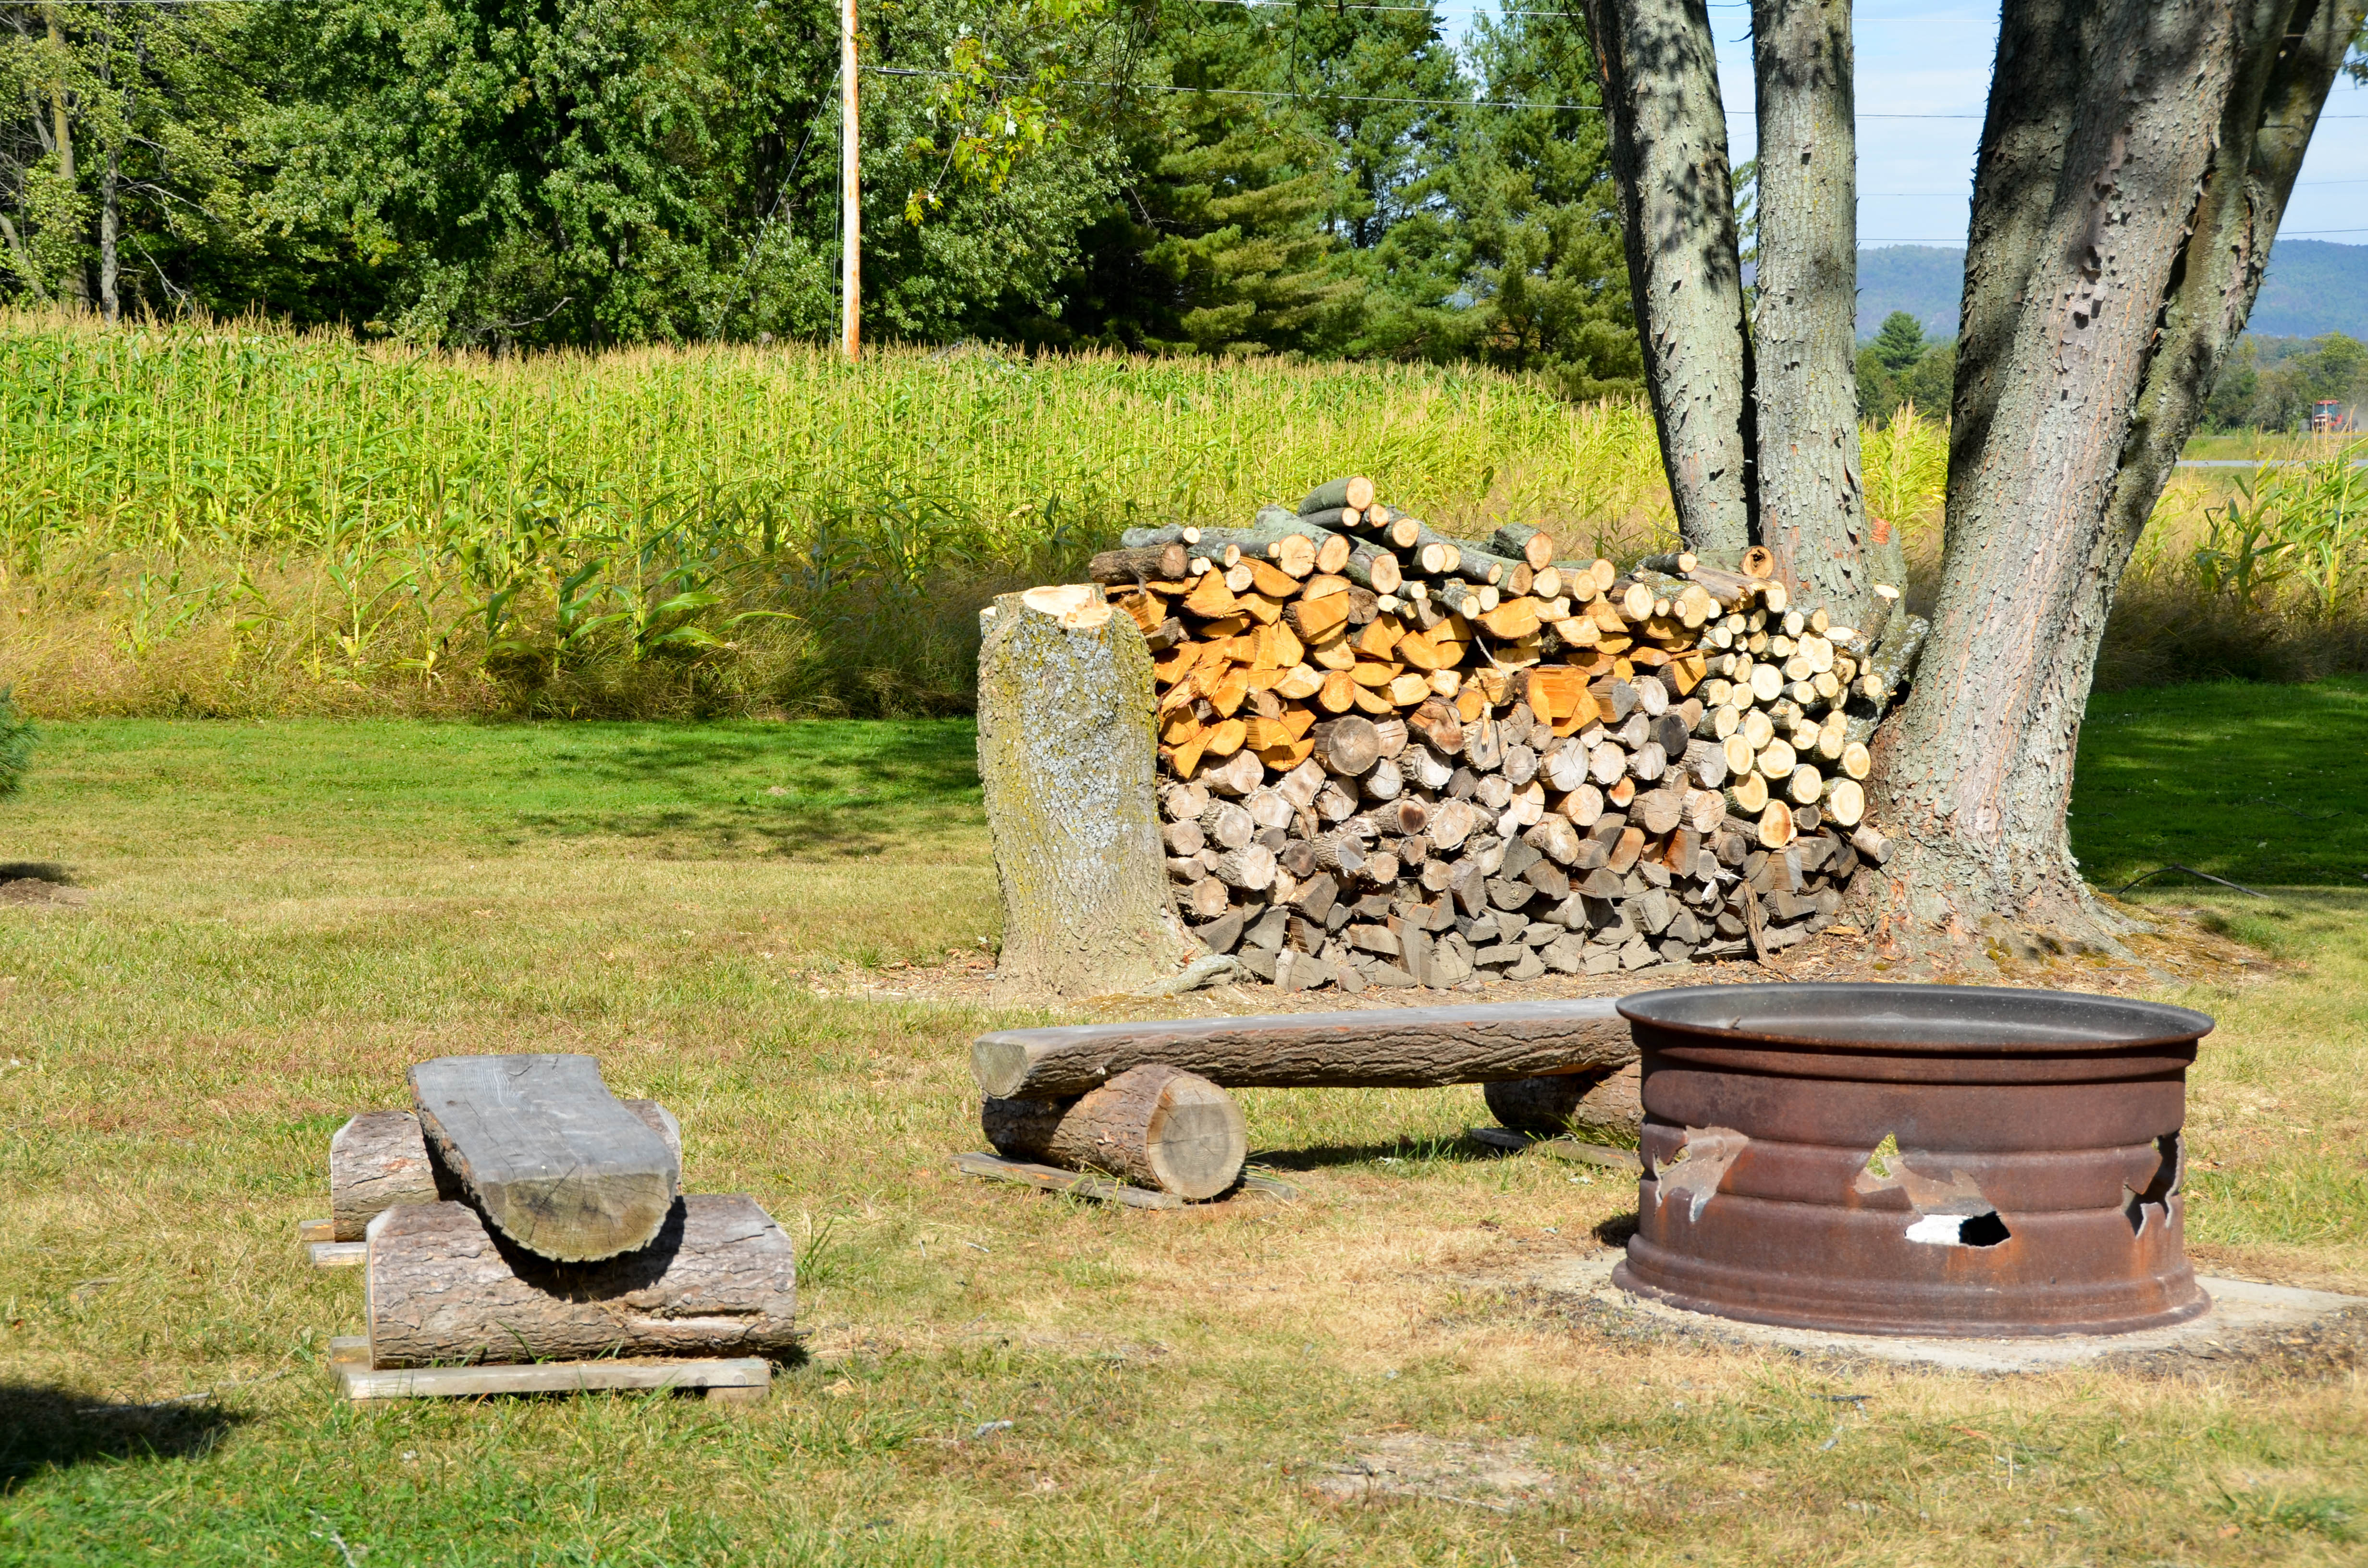 A group fire pit.